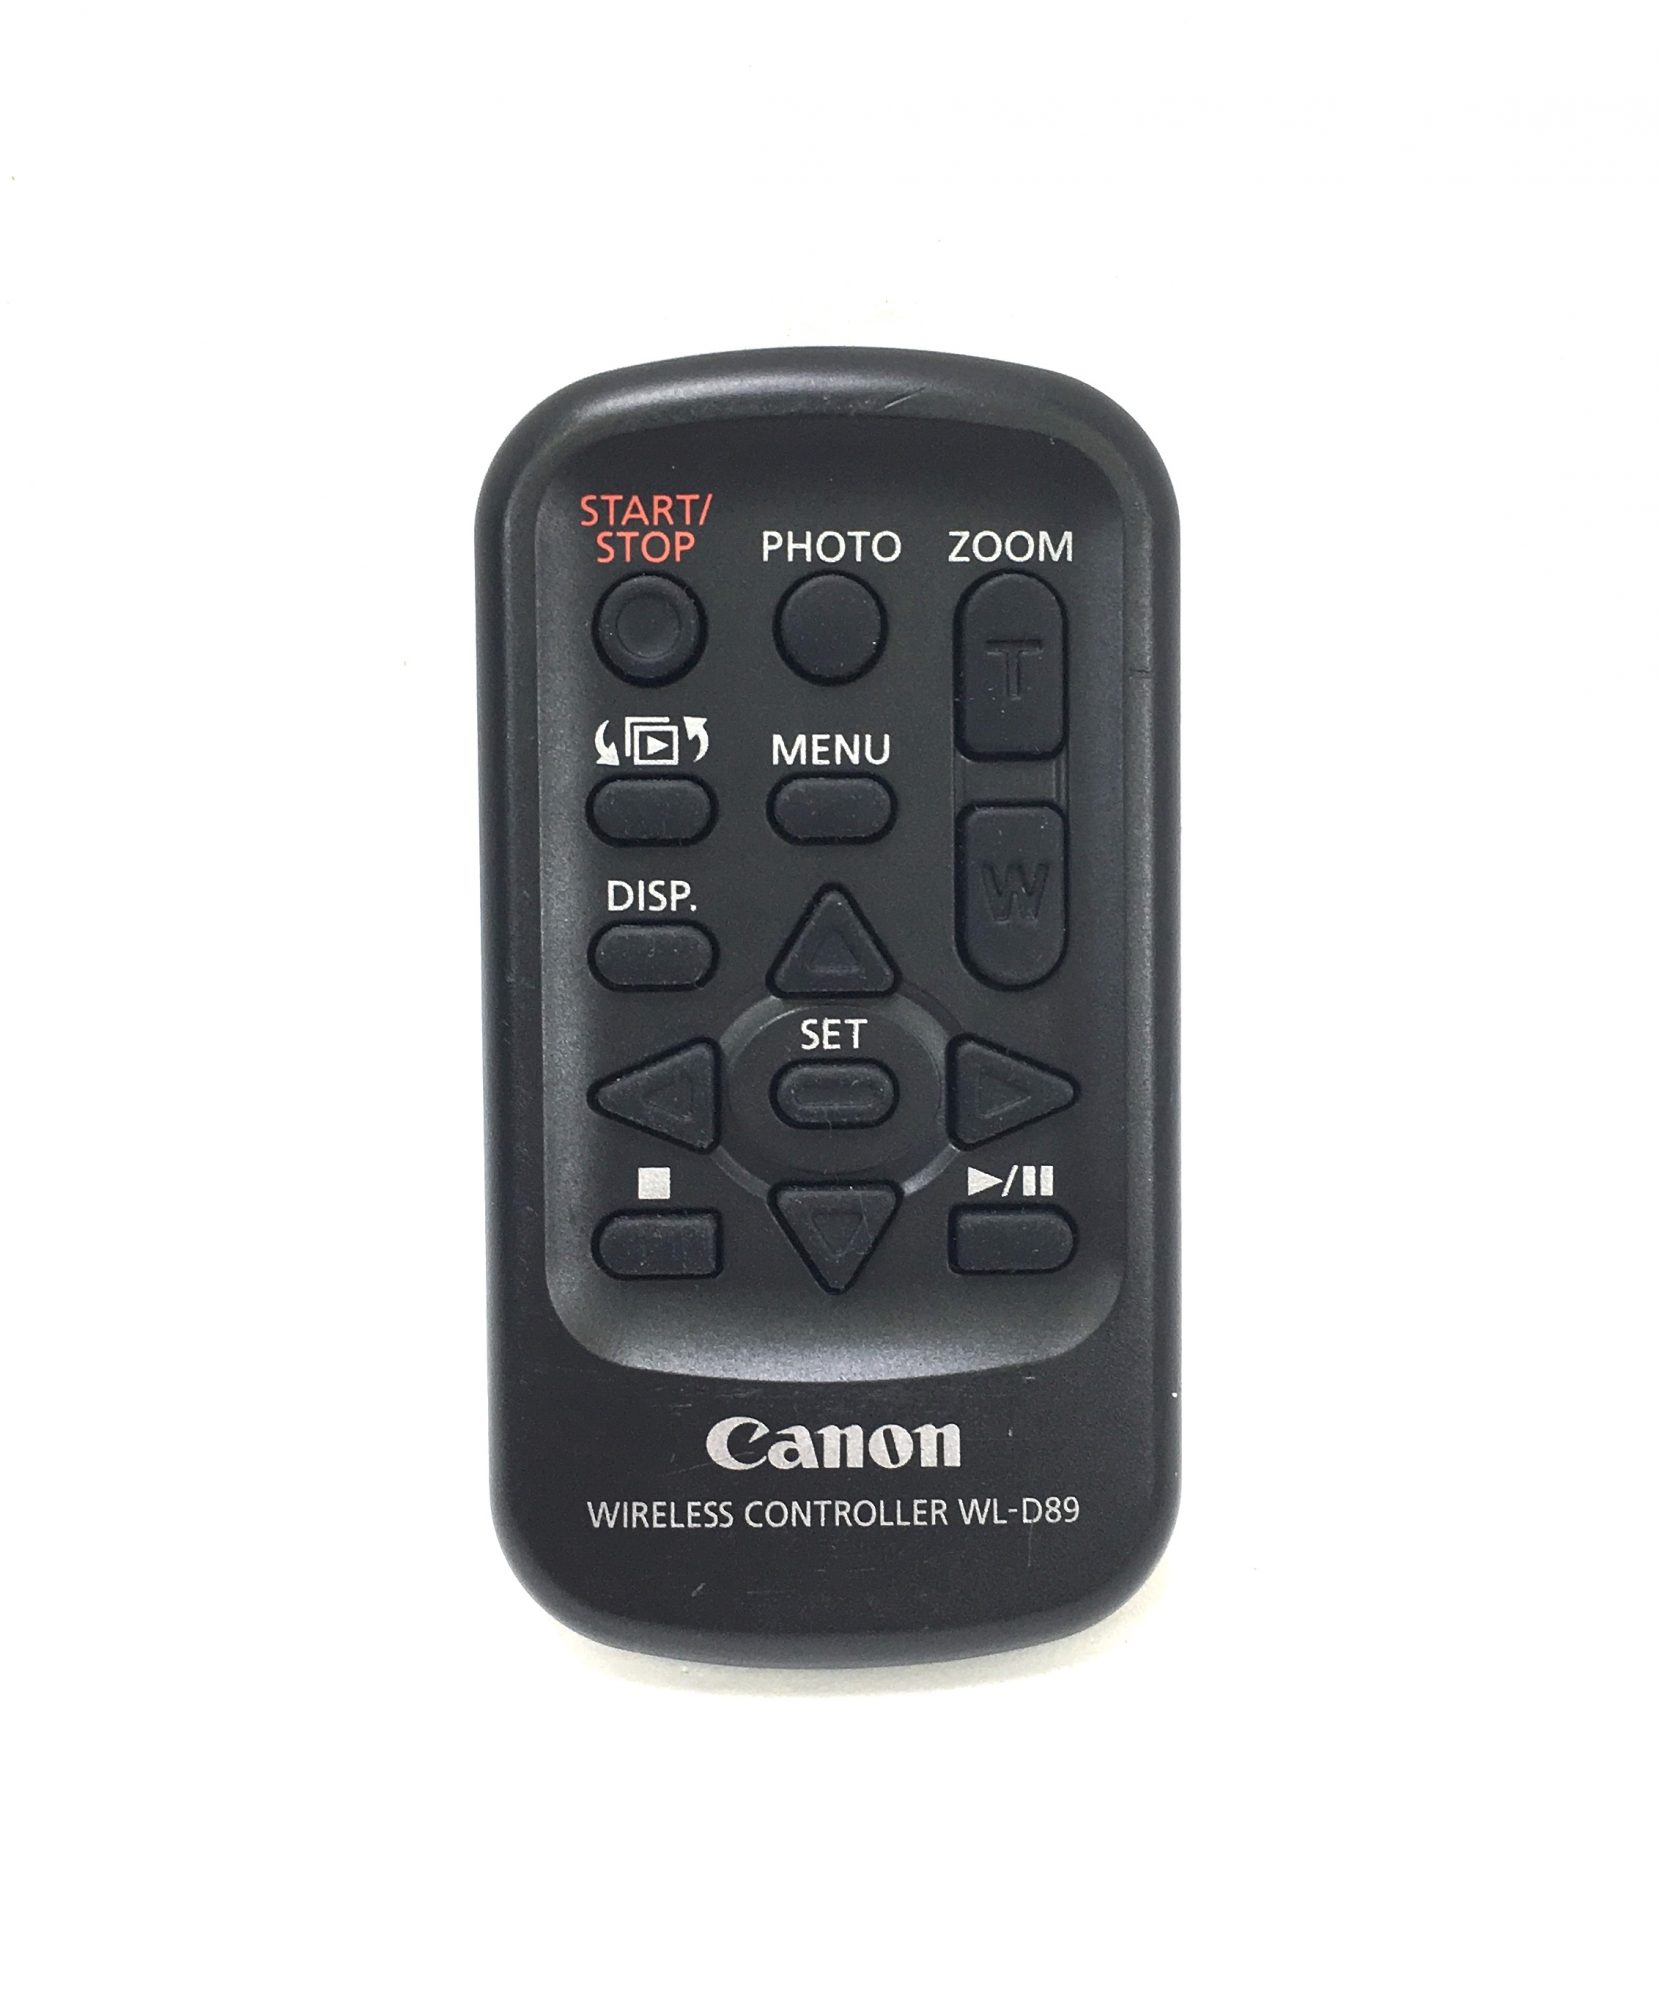 Original Wireless Remote Control for the Canon XA25 camcorder. It is a genuine Canon part, sourced directly from Canon USA. Brand new factory fresh. Free Shipping.